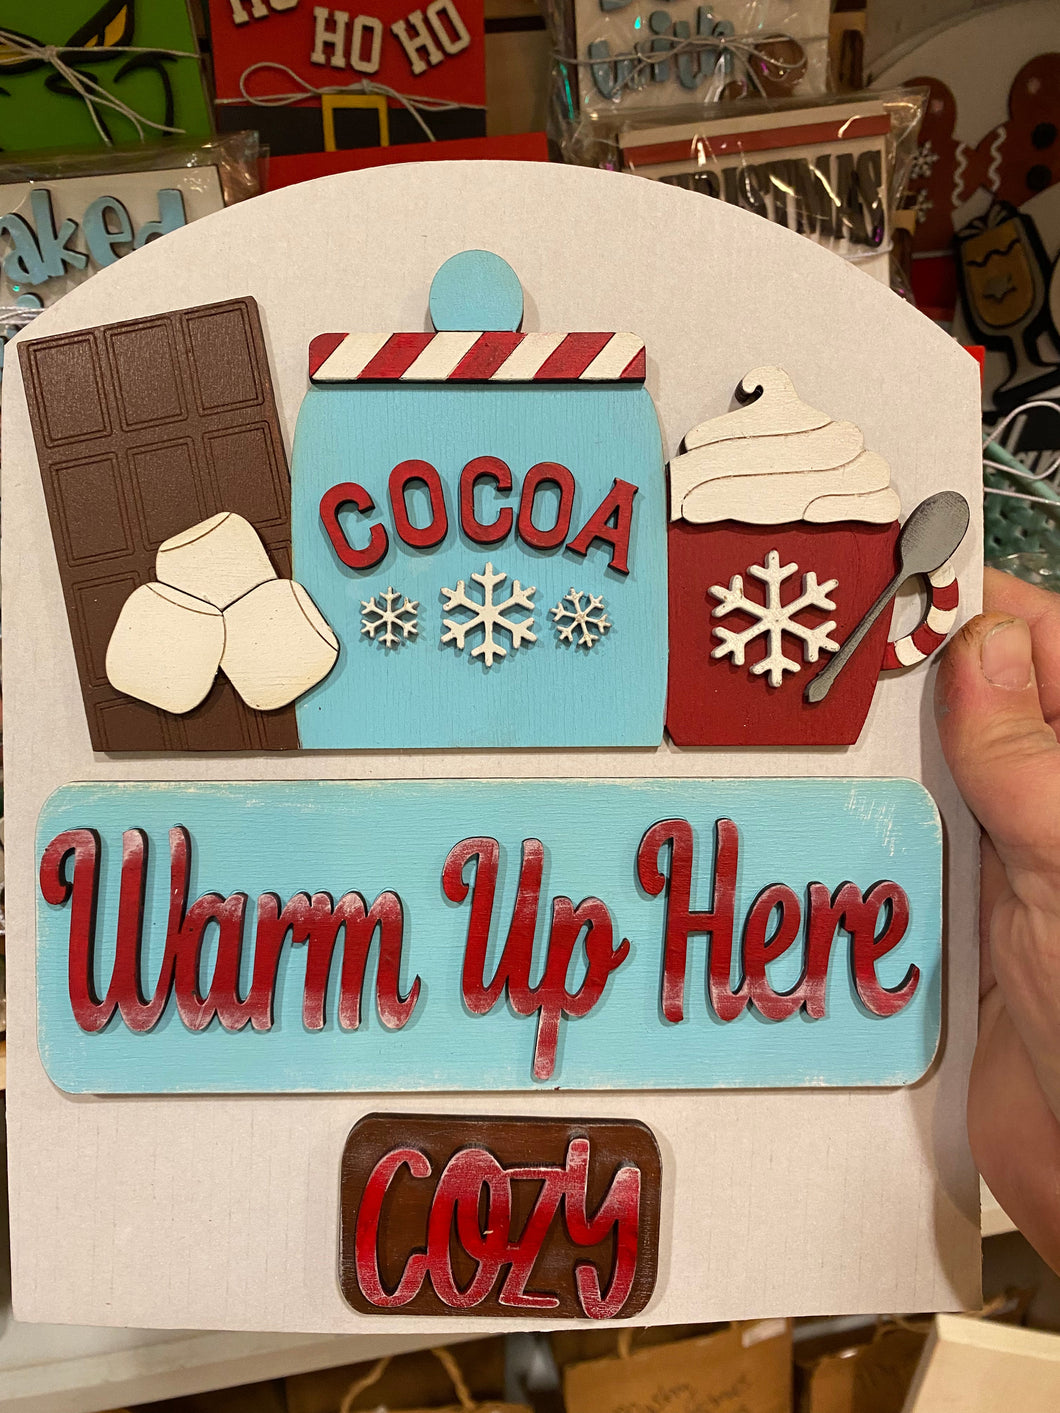 Hot Cocoa Vintage Truck Inserts